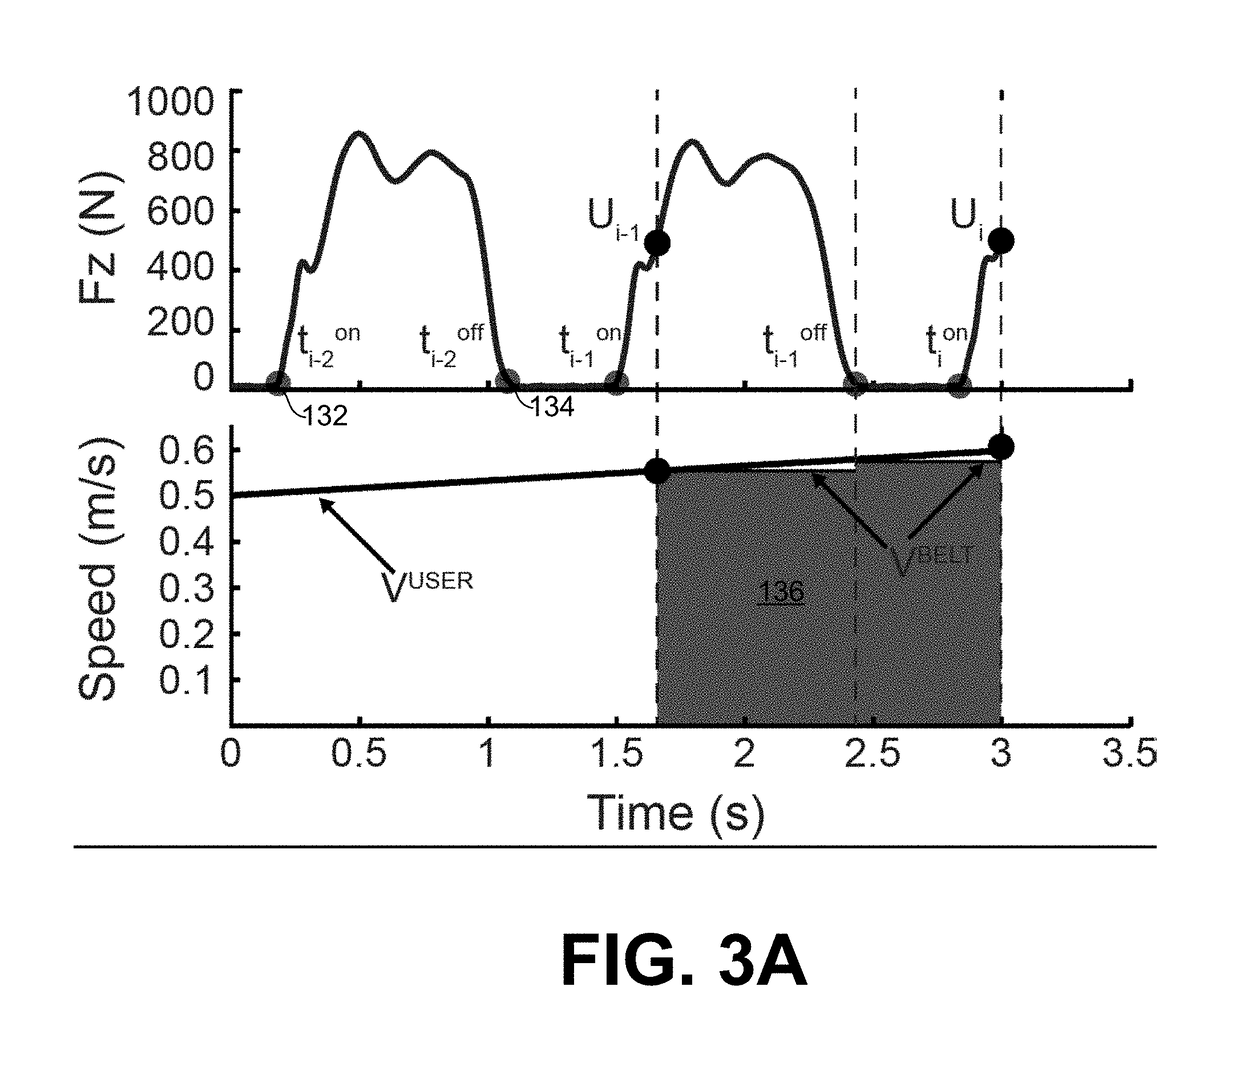 Systems and methods for controlling a self-paced treadmill using predicted subject velocity